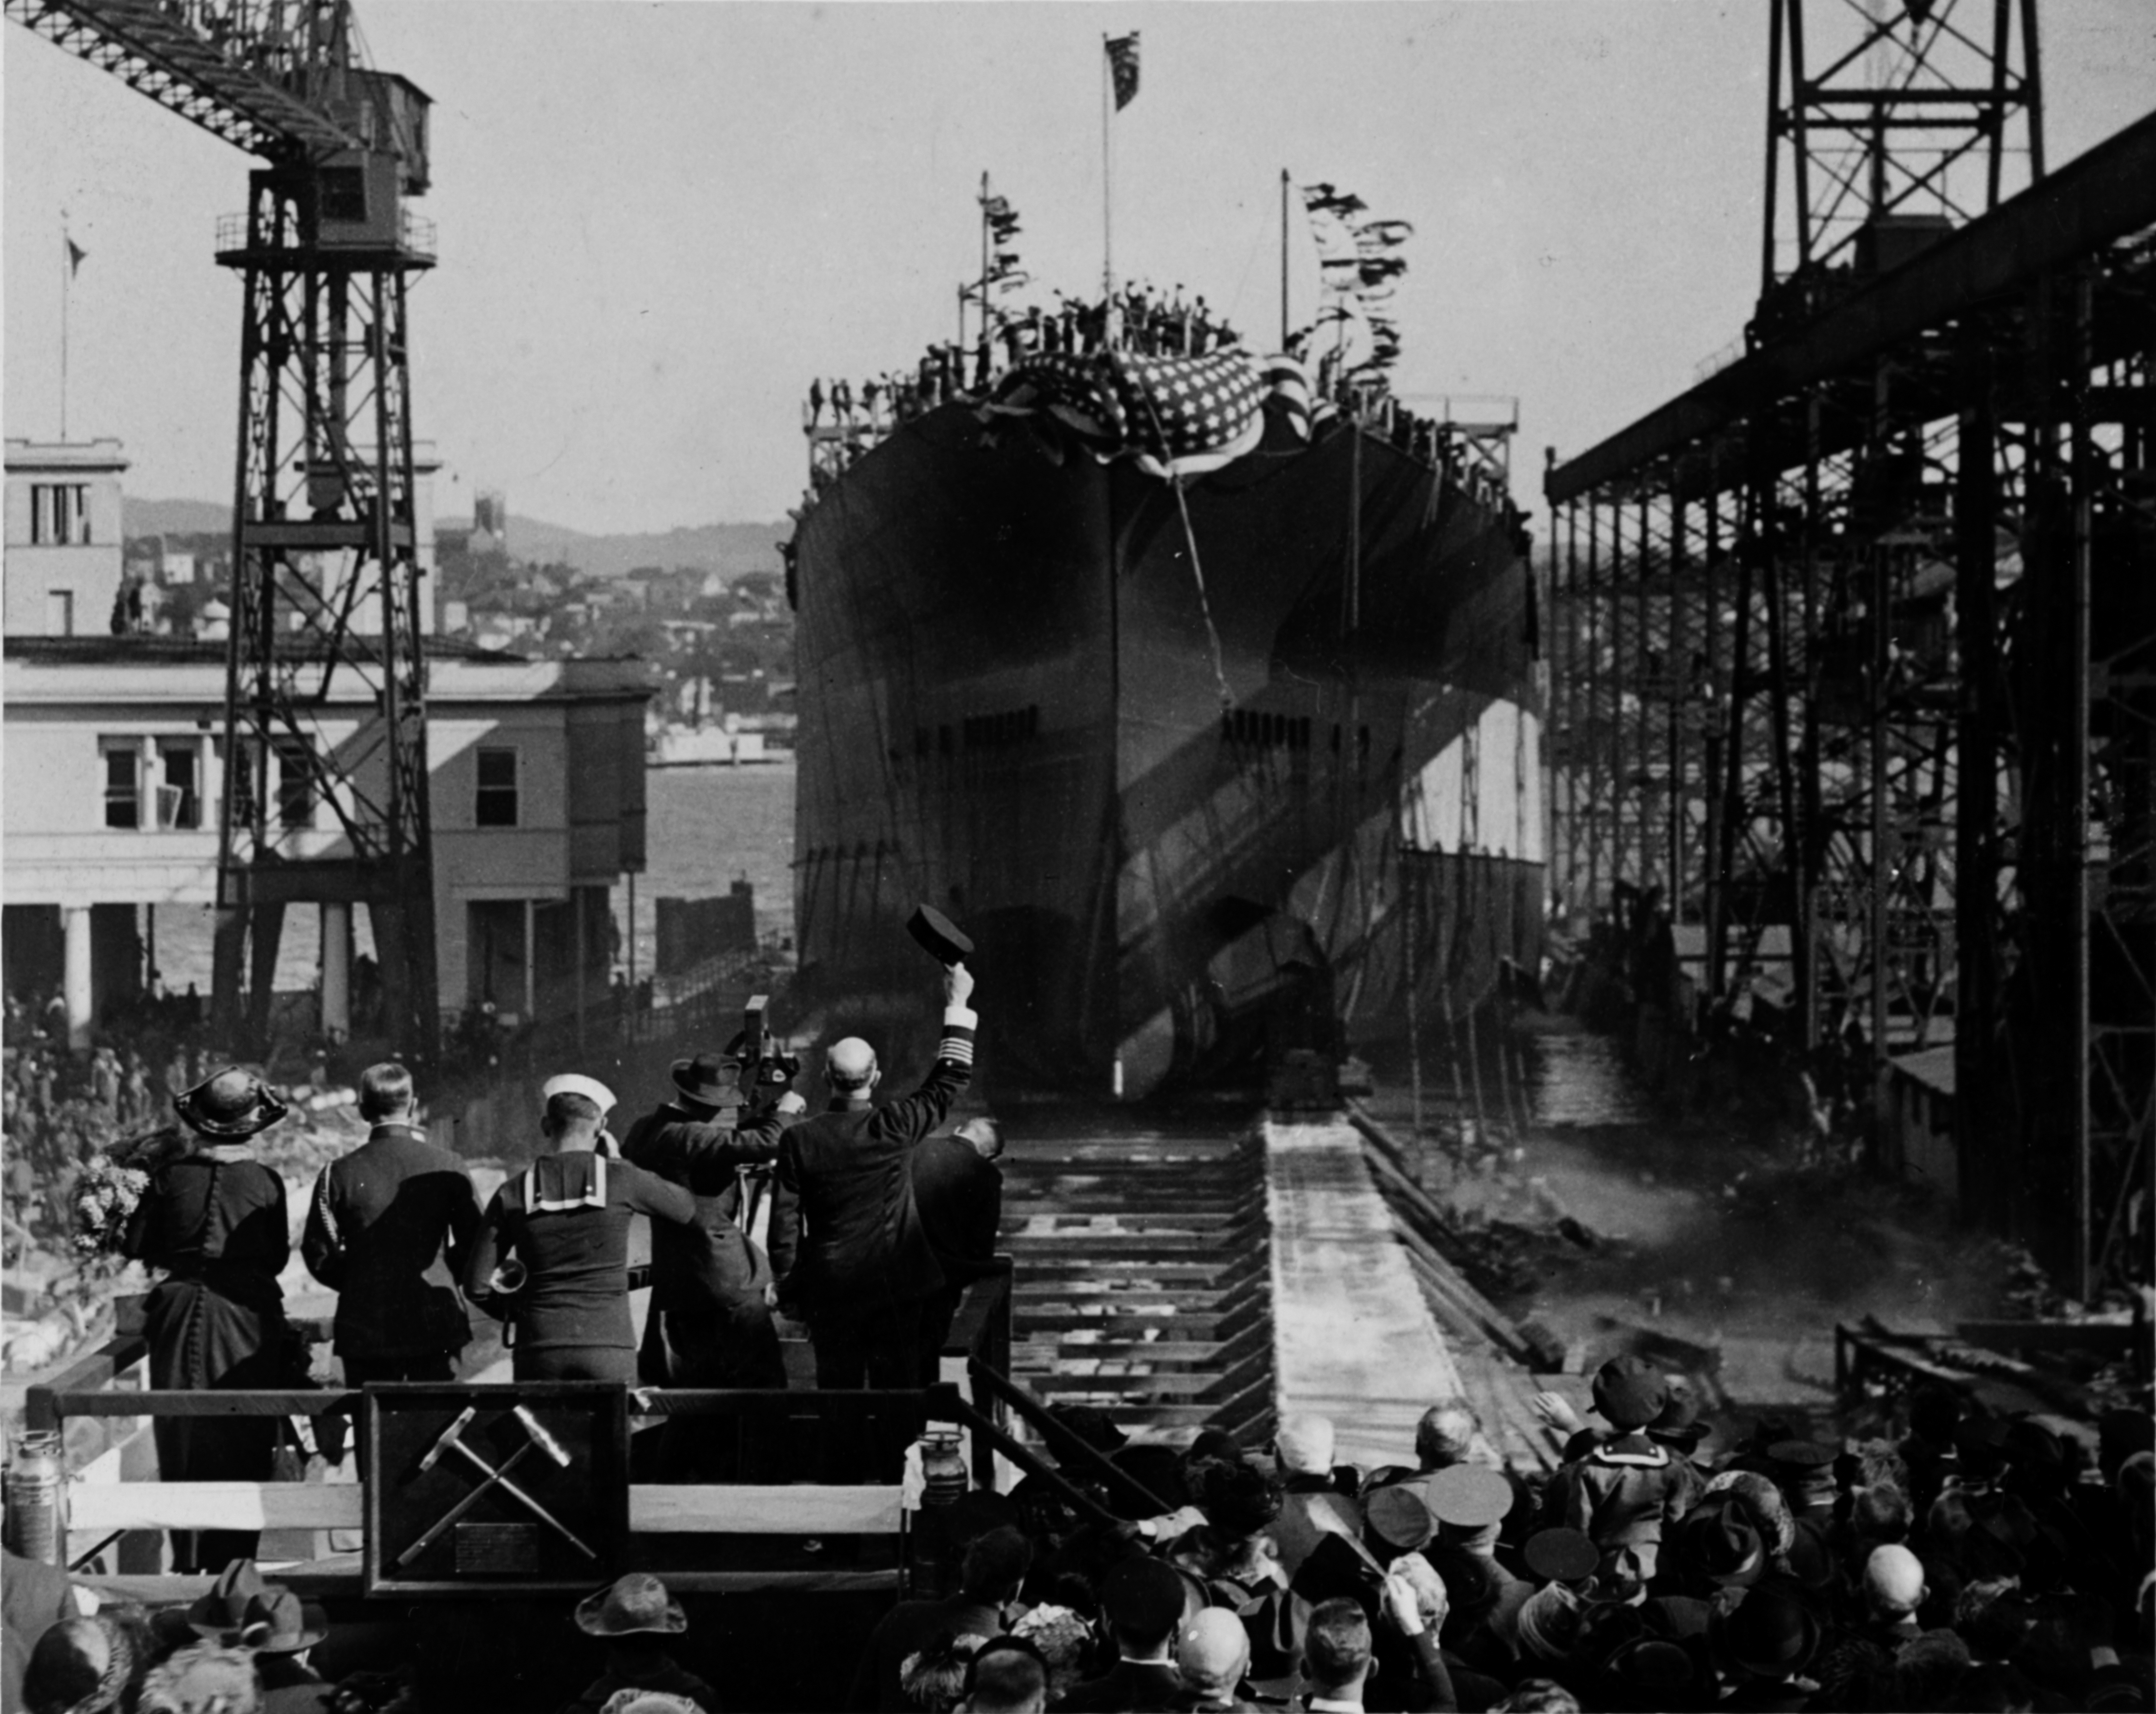 Launch of USS California at Mare Island Navy Yard, 20 Nov 1919; note the sponsor Mrs. R. T. Zane (left, woman with hat), a bugler (center), a motion picture camera with its operator, and a US Navy captain (waving hat) on the platform